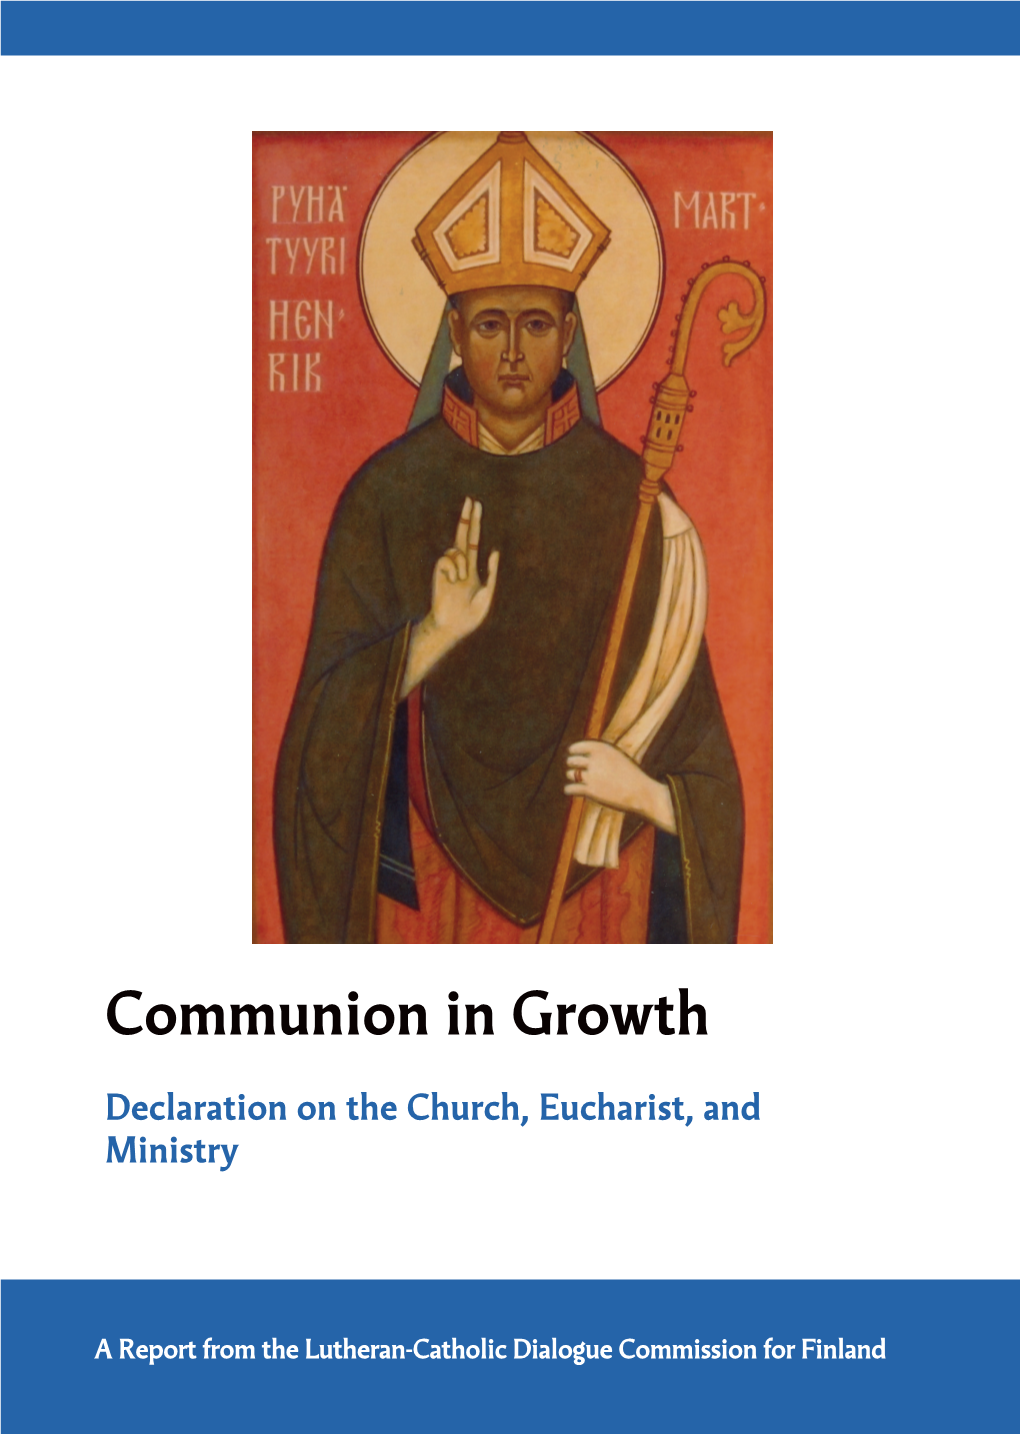 Communion in Growth. Declaration on the Church, Eucharist and Ministry